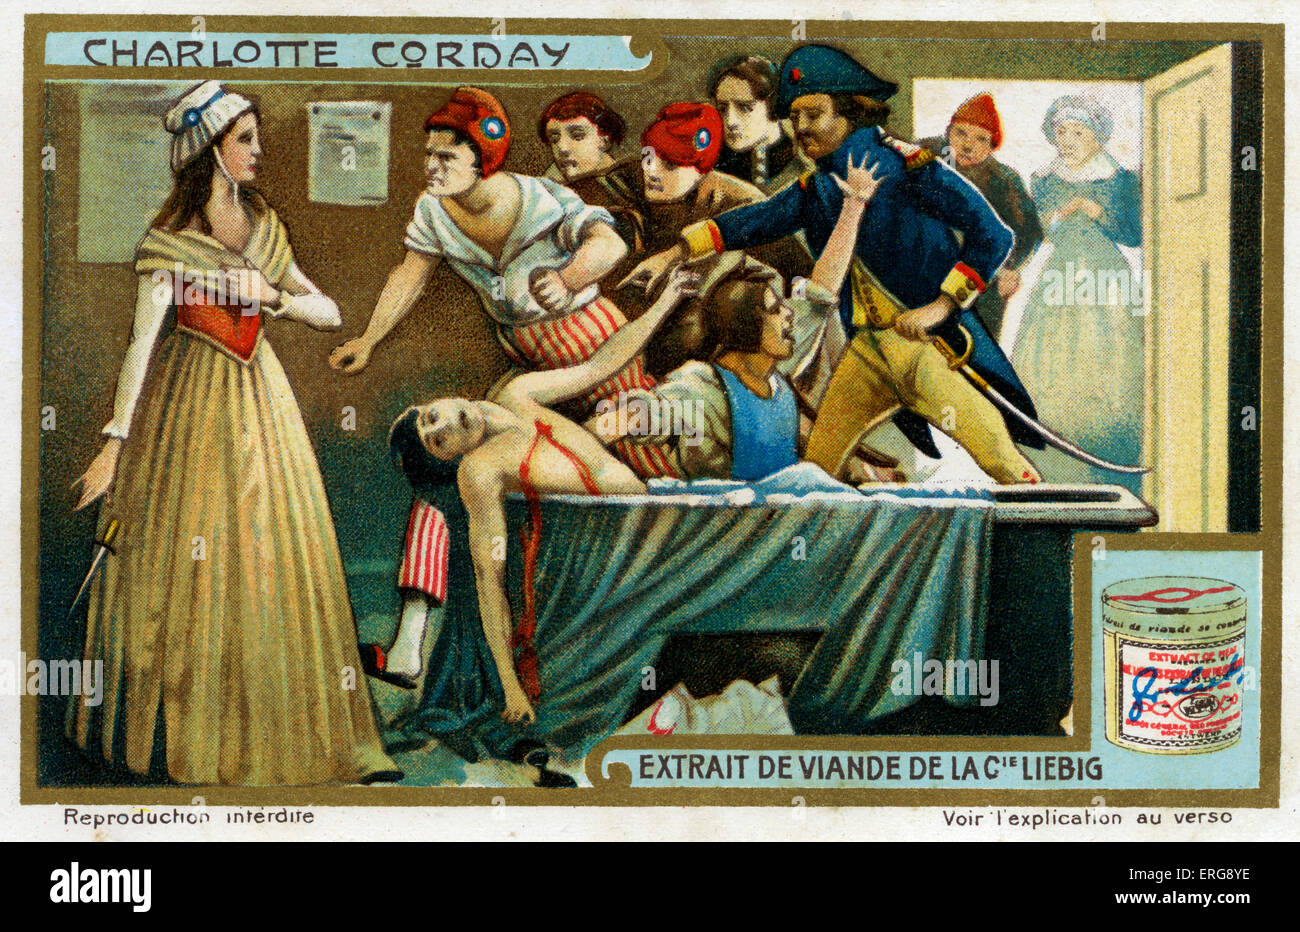 Marie-Anne Charlotte de Corday d'Armont (27 Jul 1768 – 17 Jul 1793): a heroine of the French Revolution, executed by guillotine Stock Photo